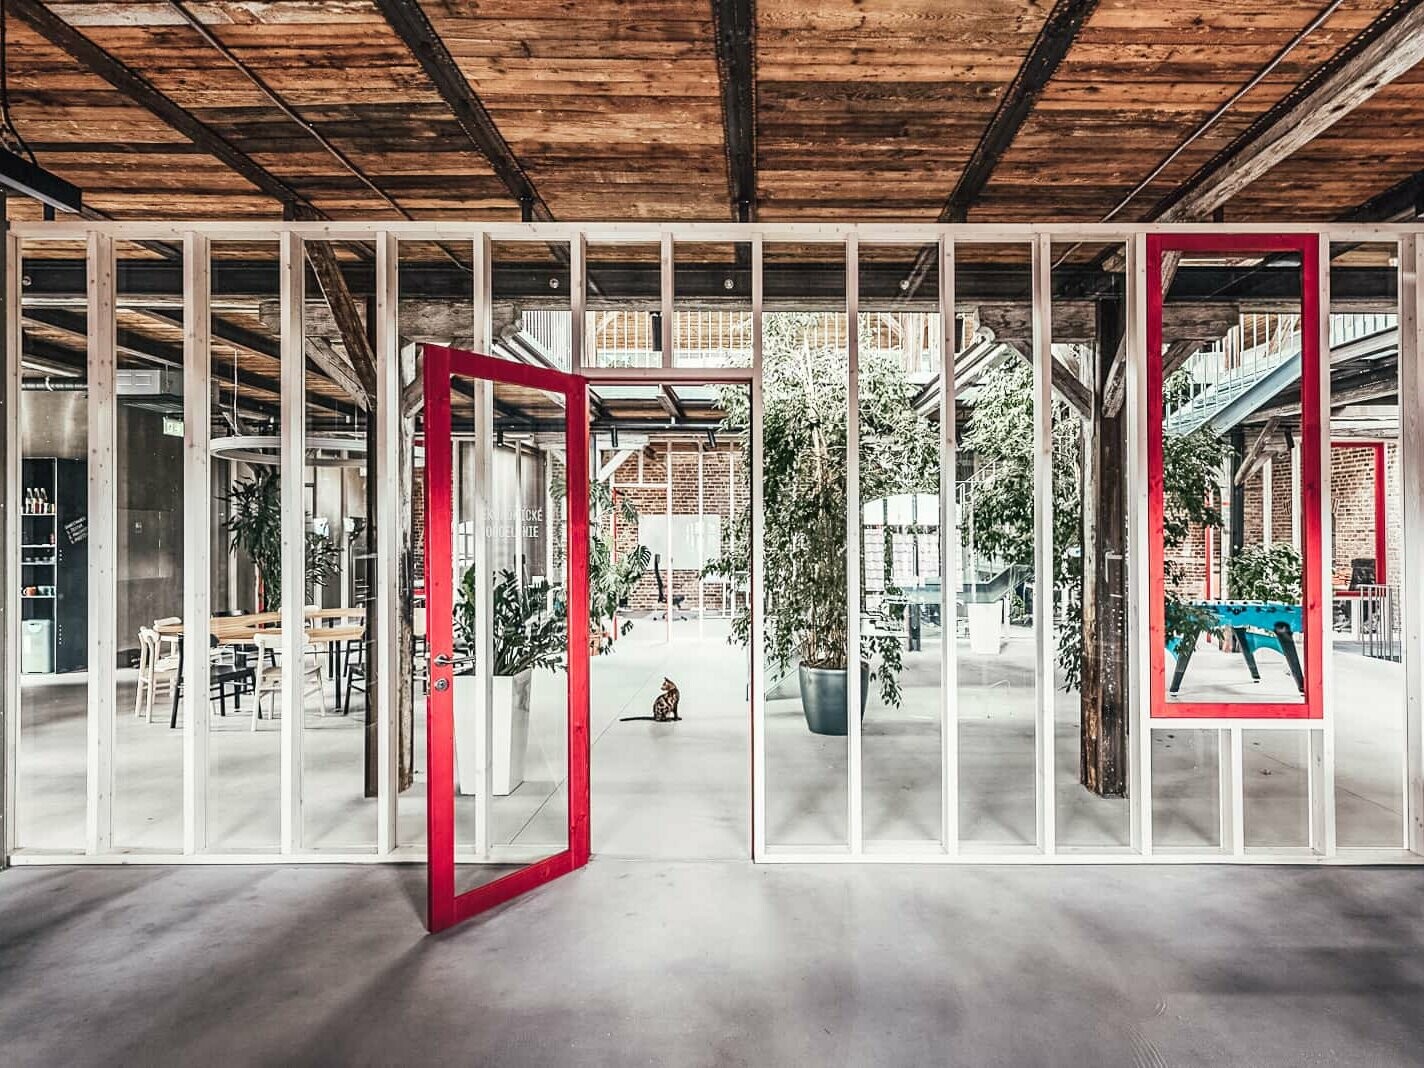 A shot from the interior of the enamel factory. The ceiling is made of wood. With red frame accents, the glass front becomes a real eye-catcher.